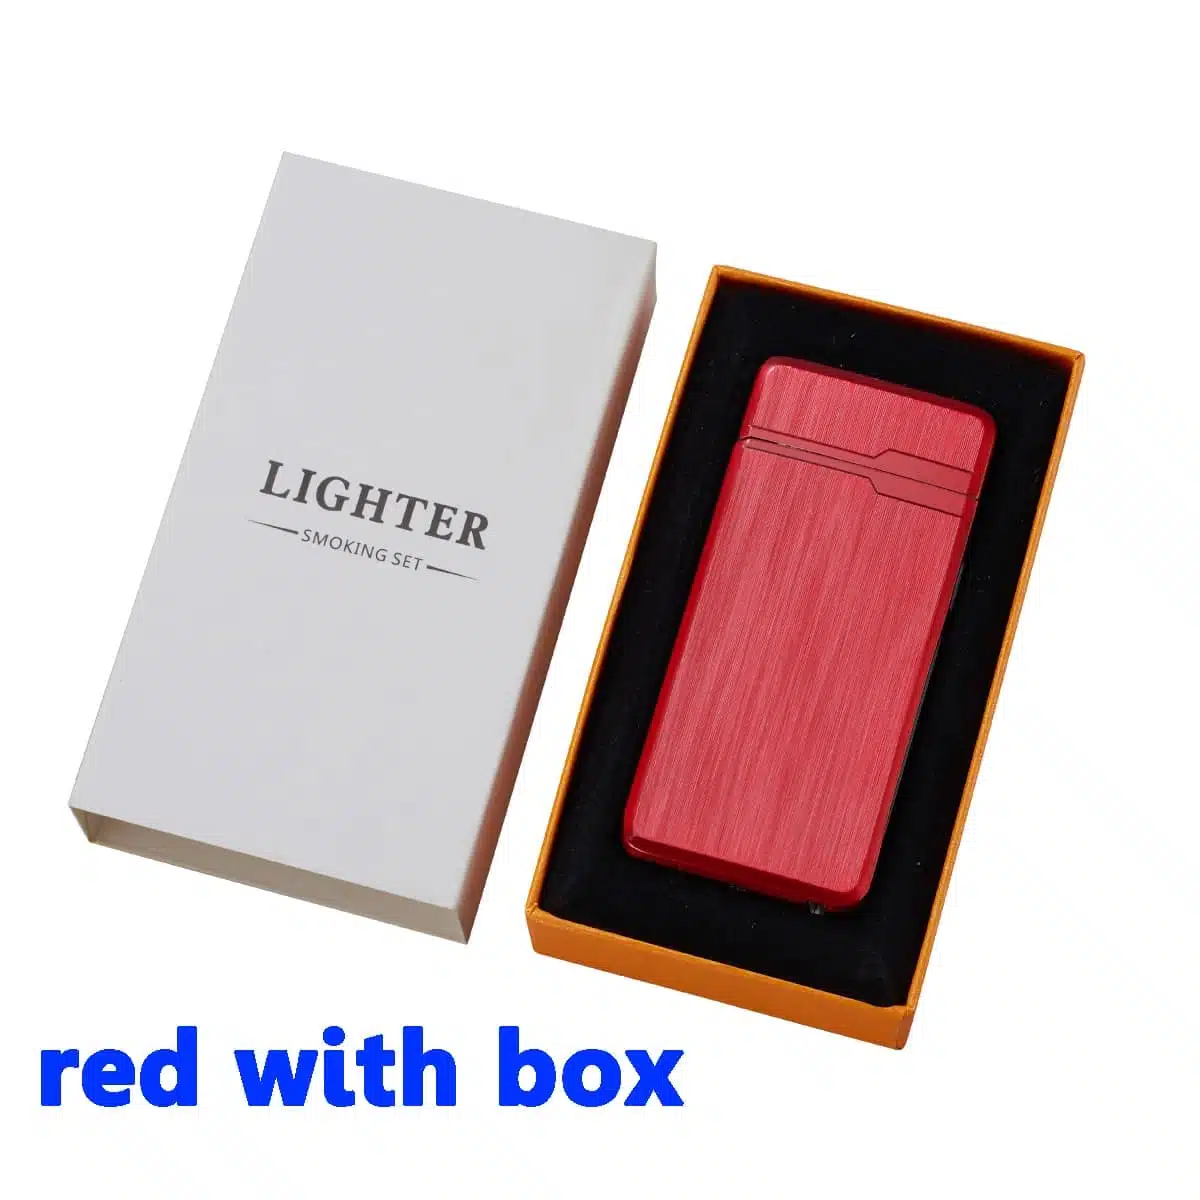 Red WIth box